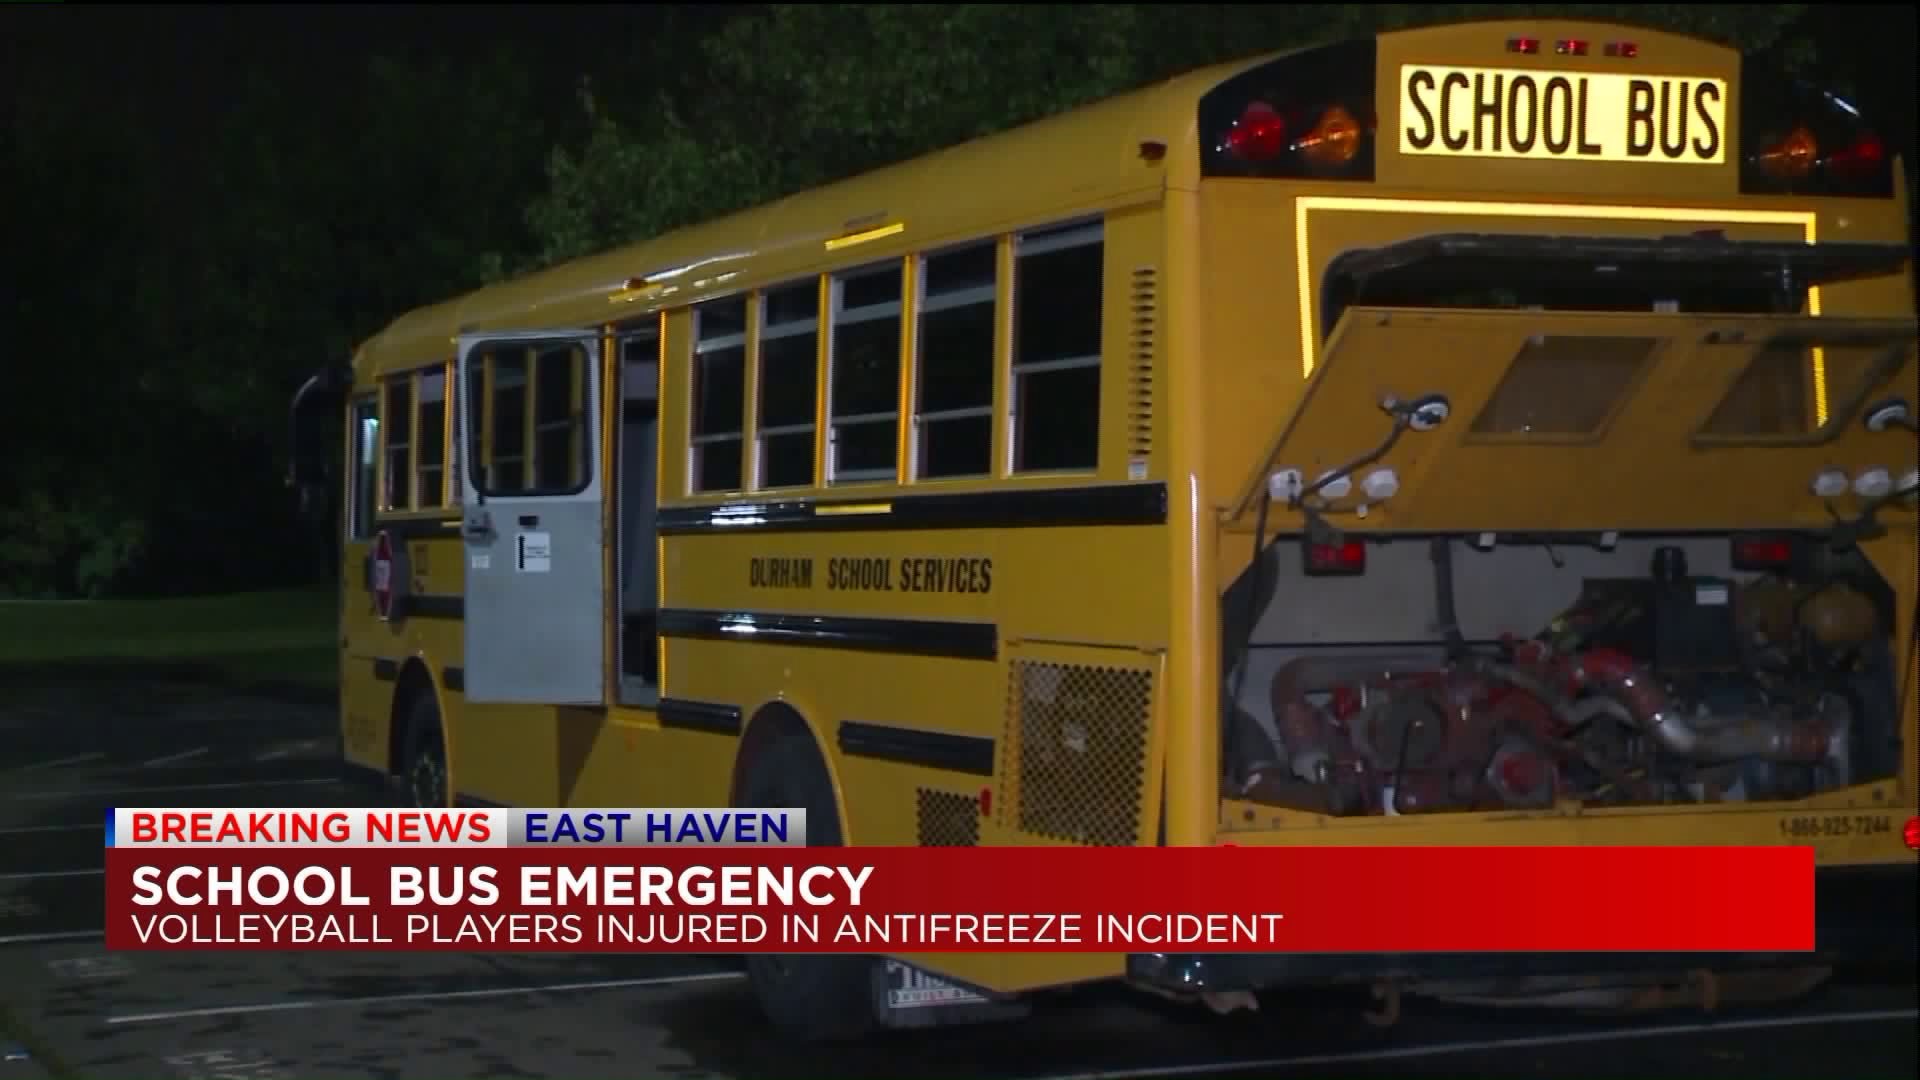 Several East Haven High School students injured following antifreeze spill on bus